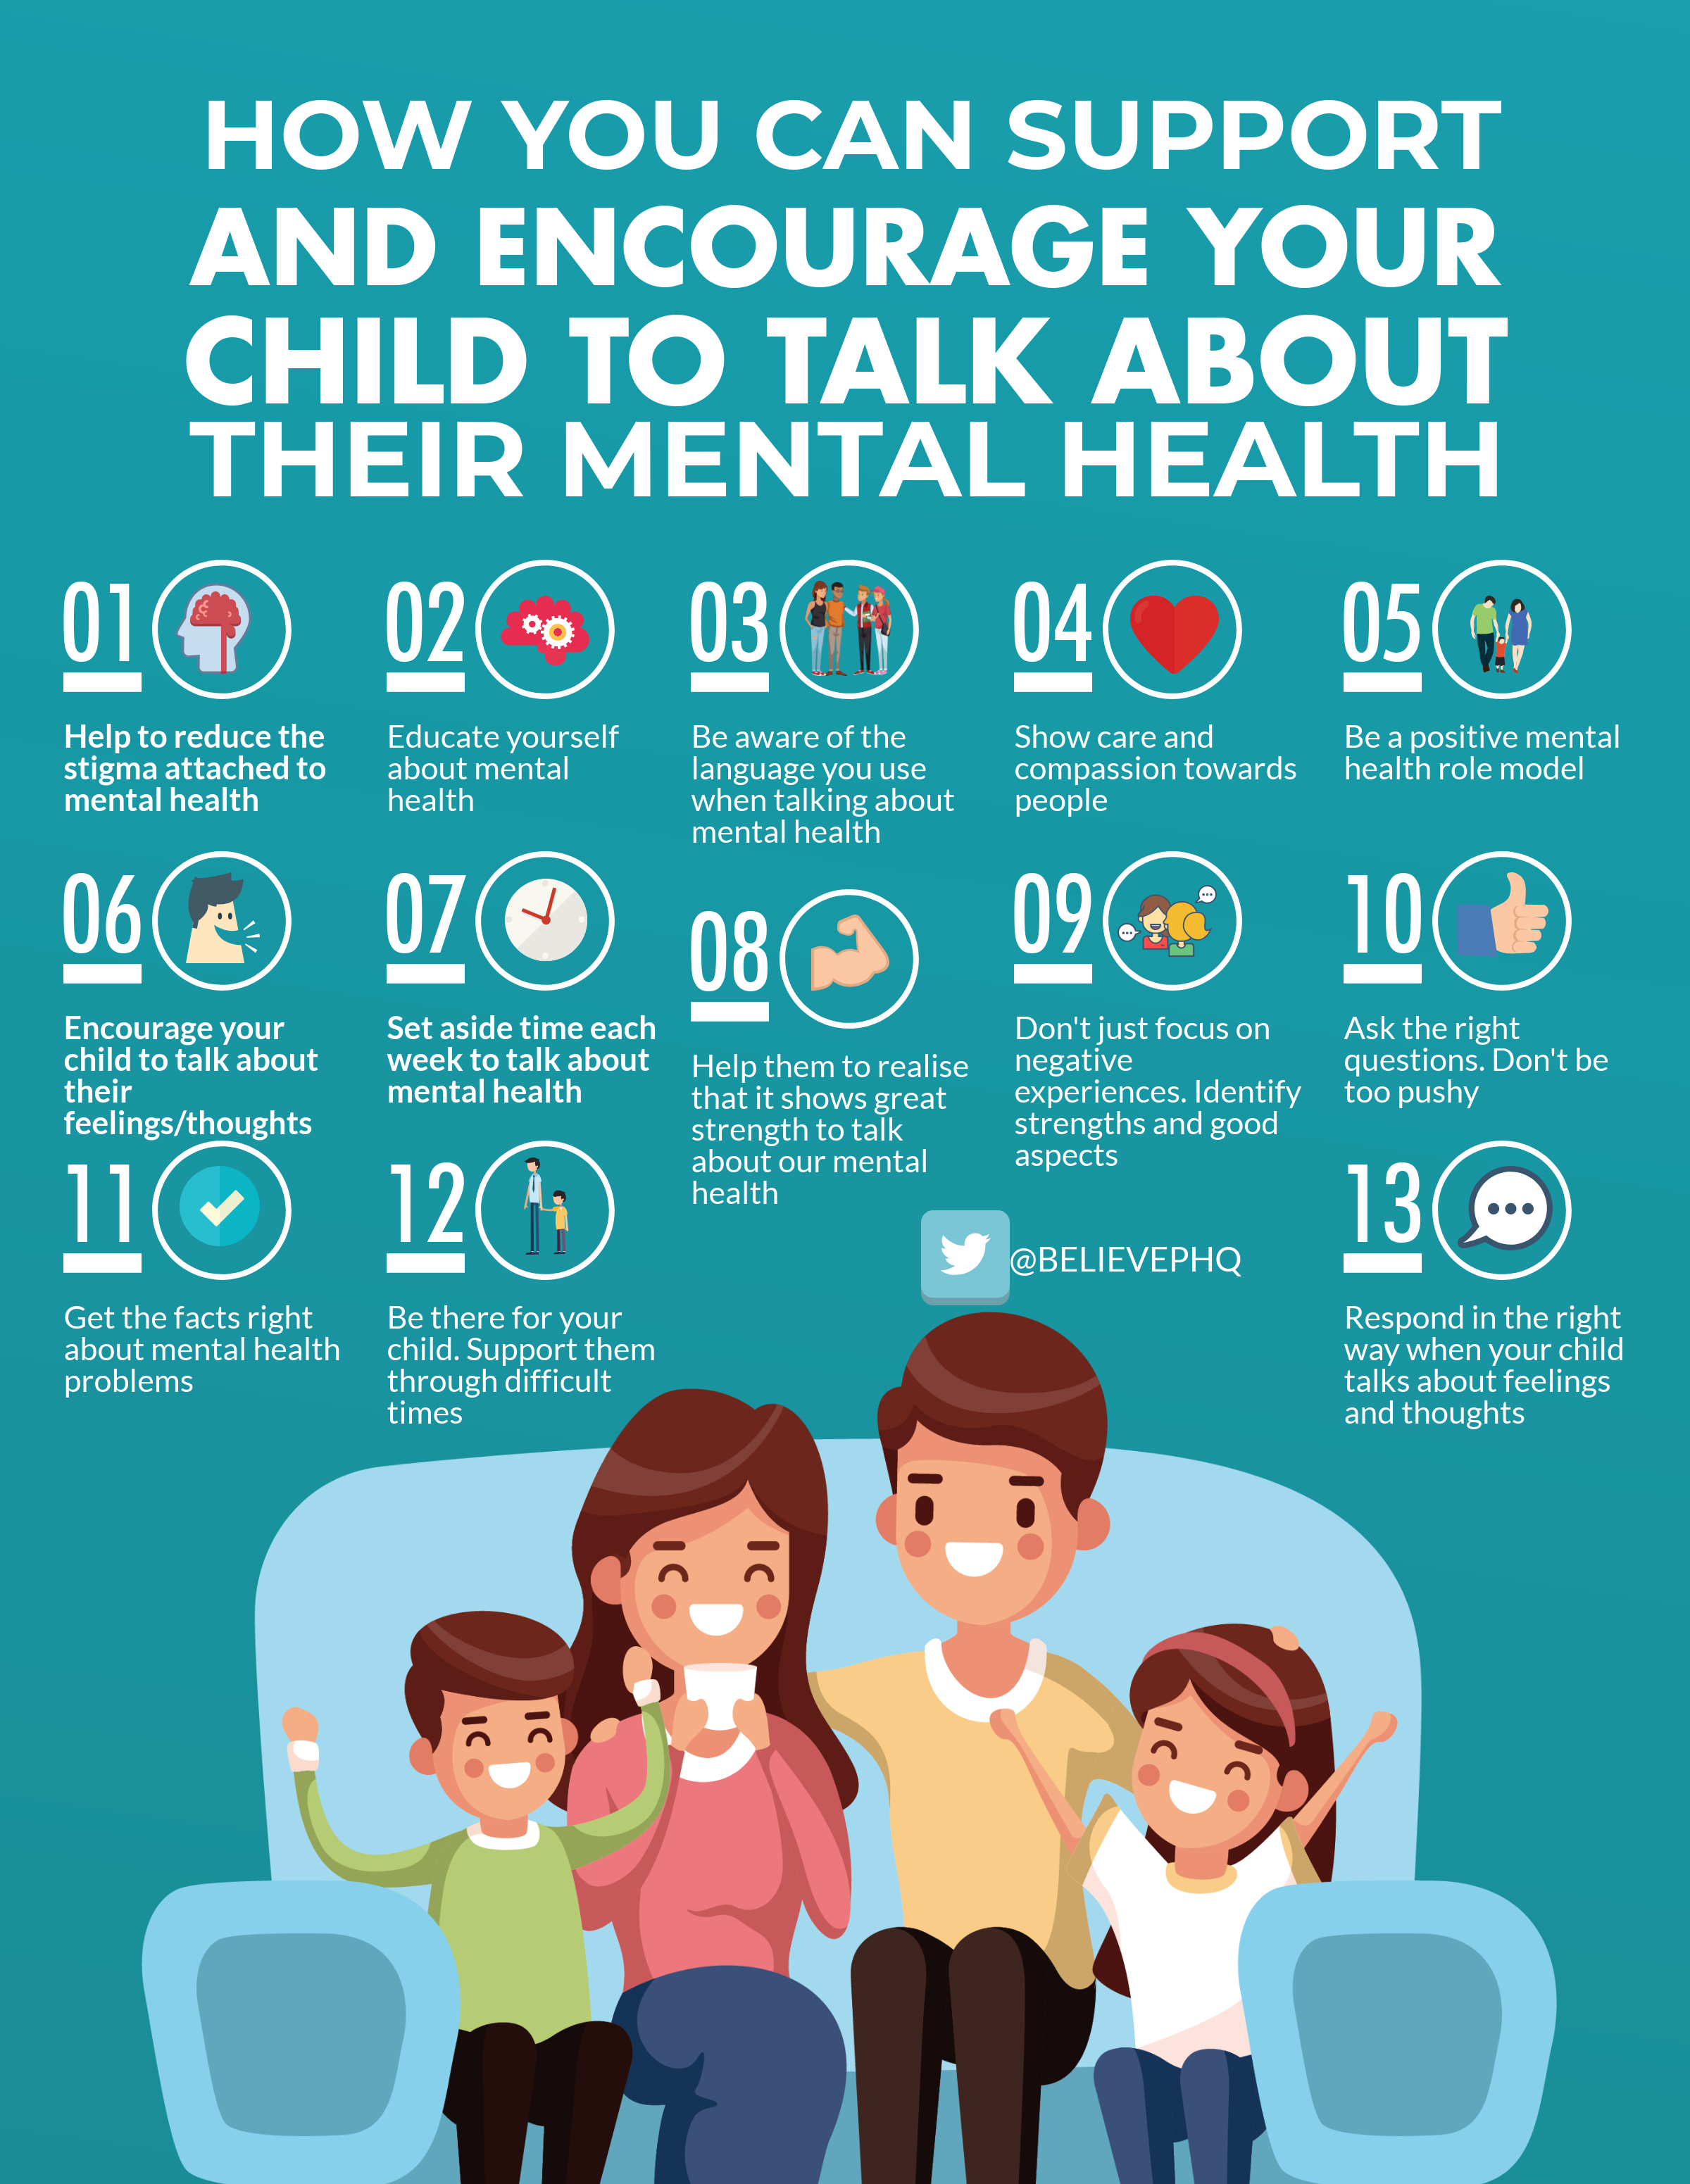 How you can support and encourage your child to talk about